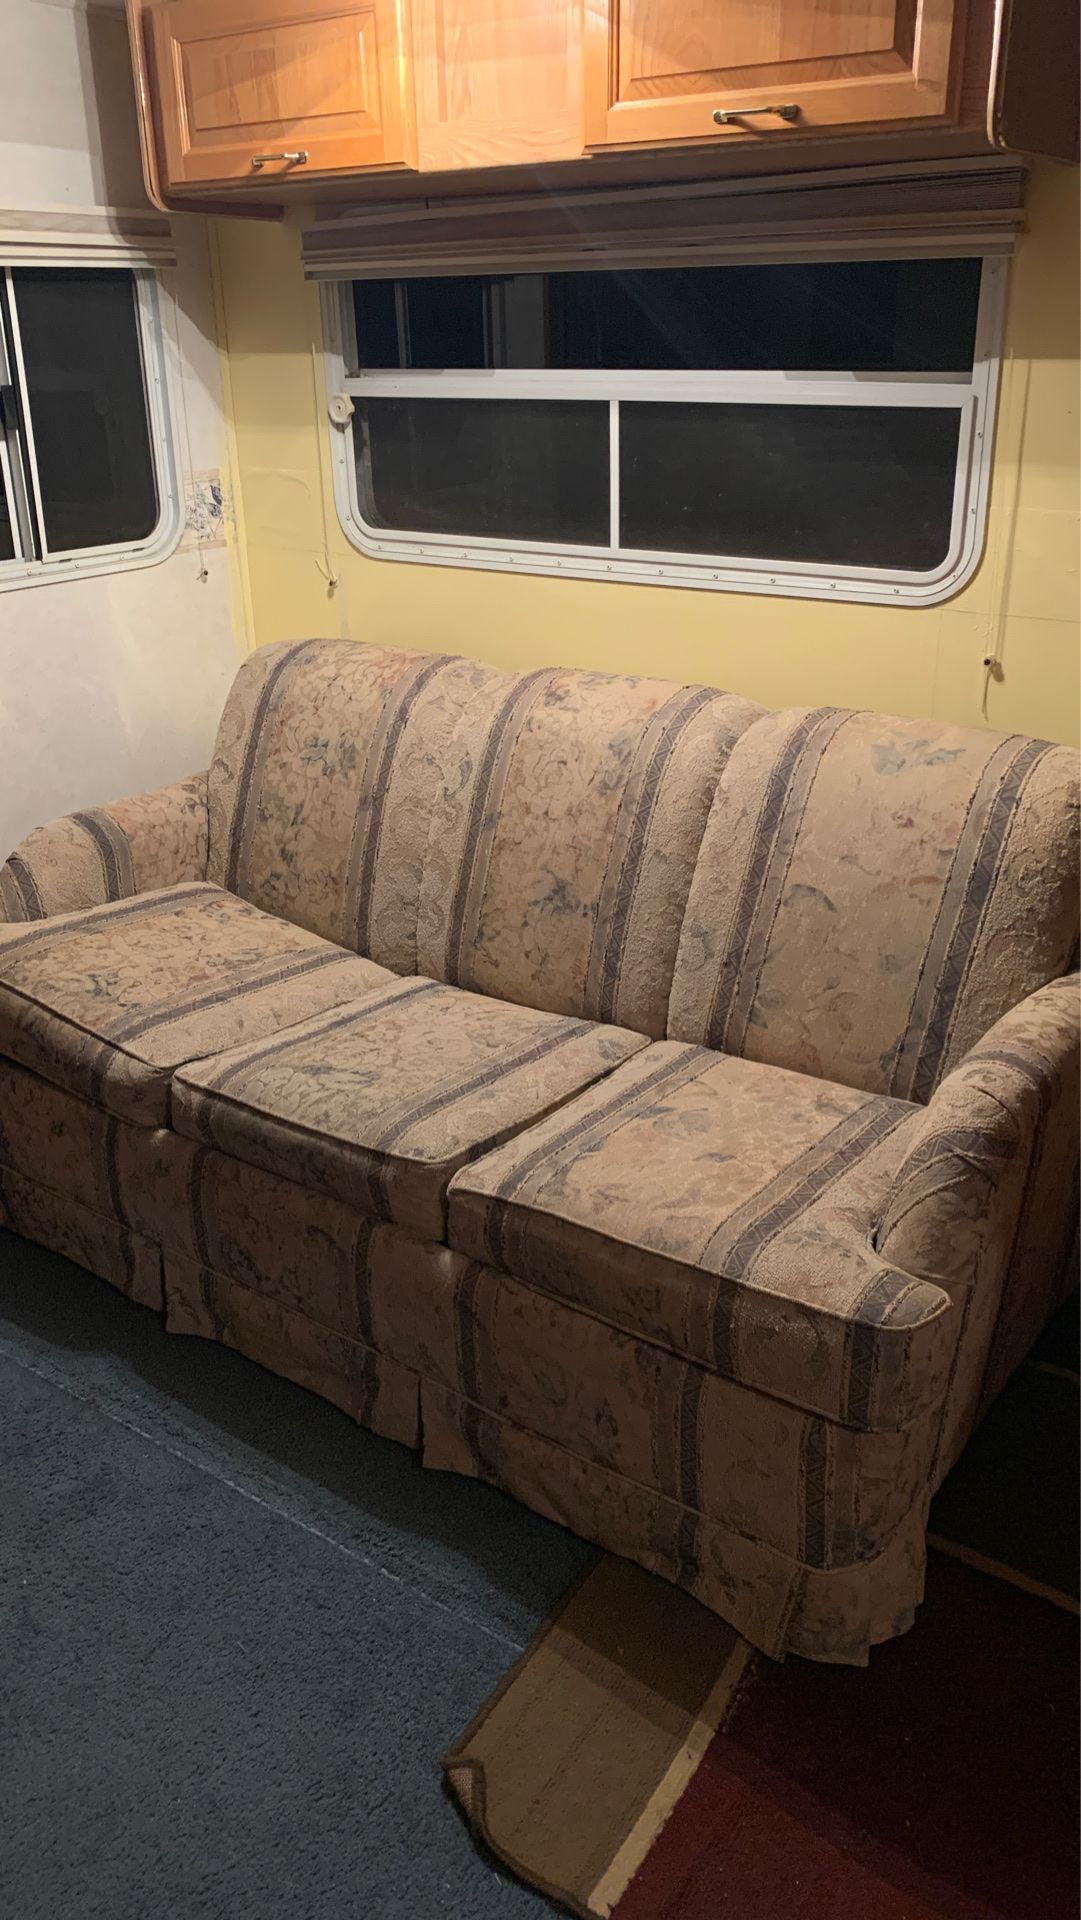 RV couch hide a bed